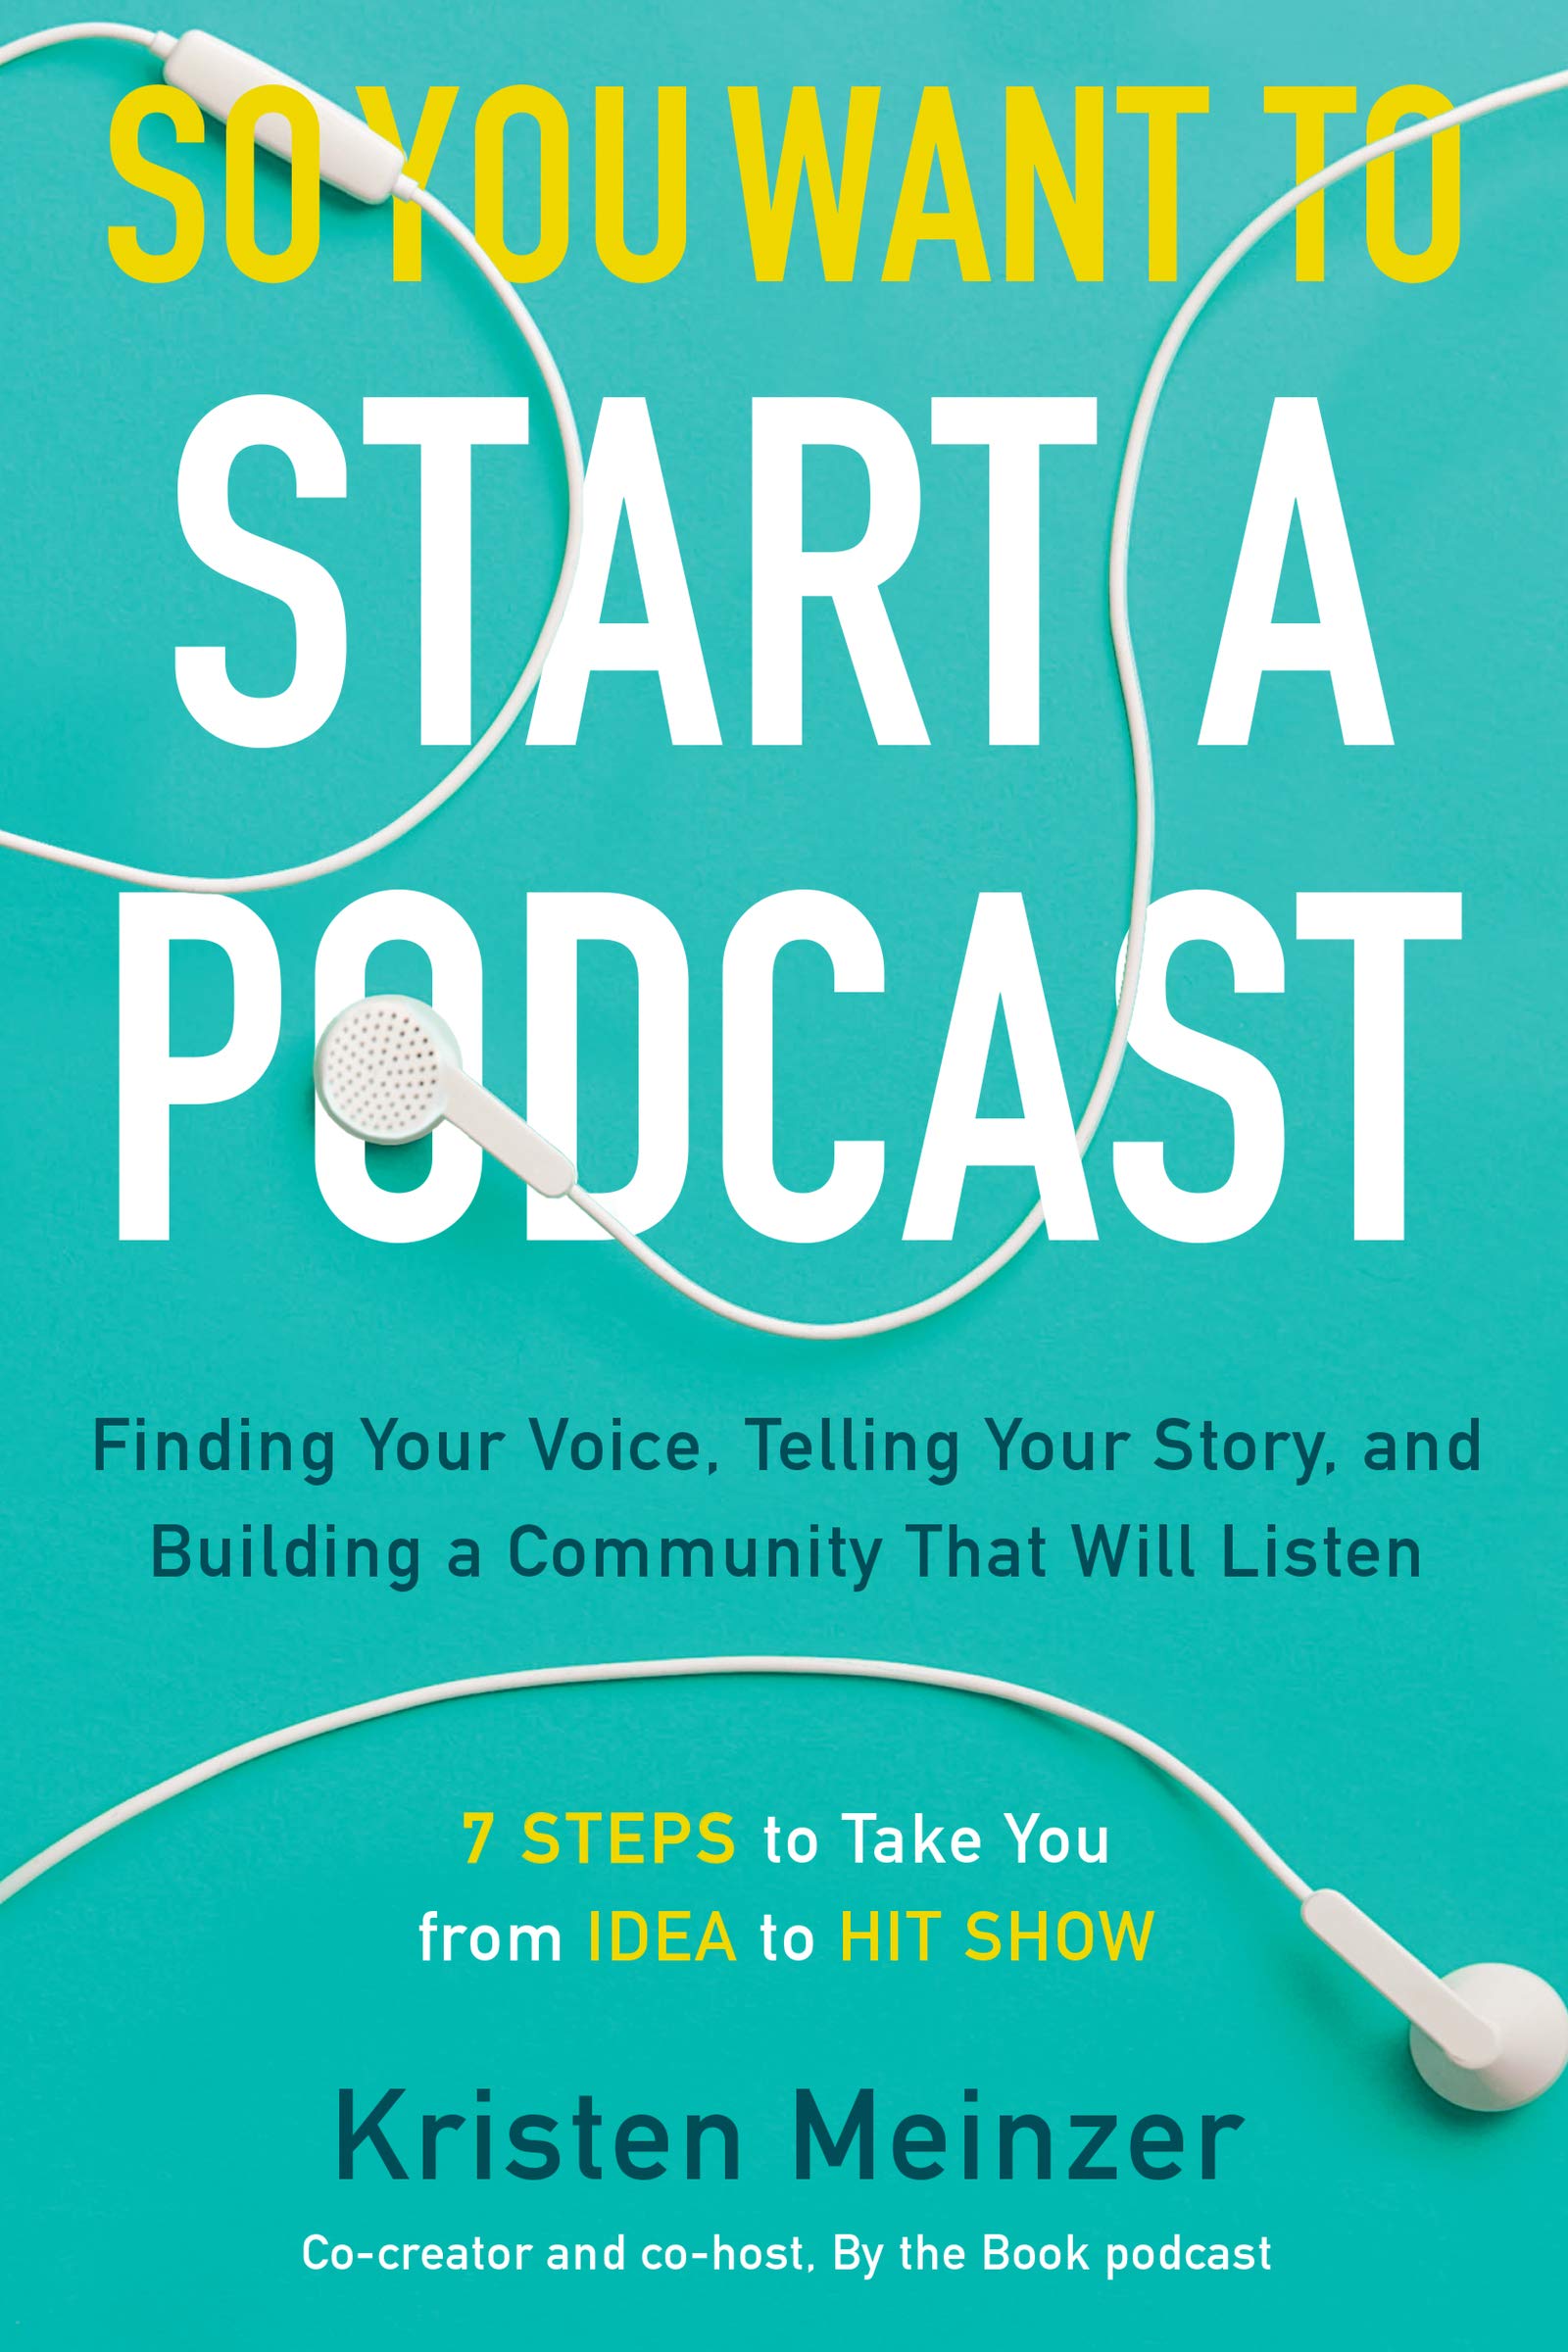 Image for "So You Want to Start a Podcast"